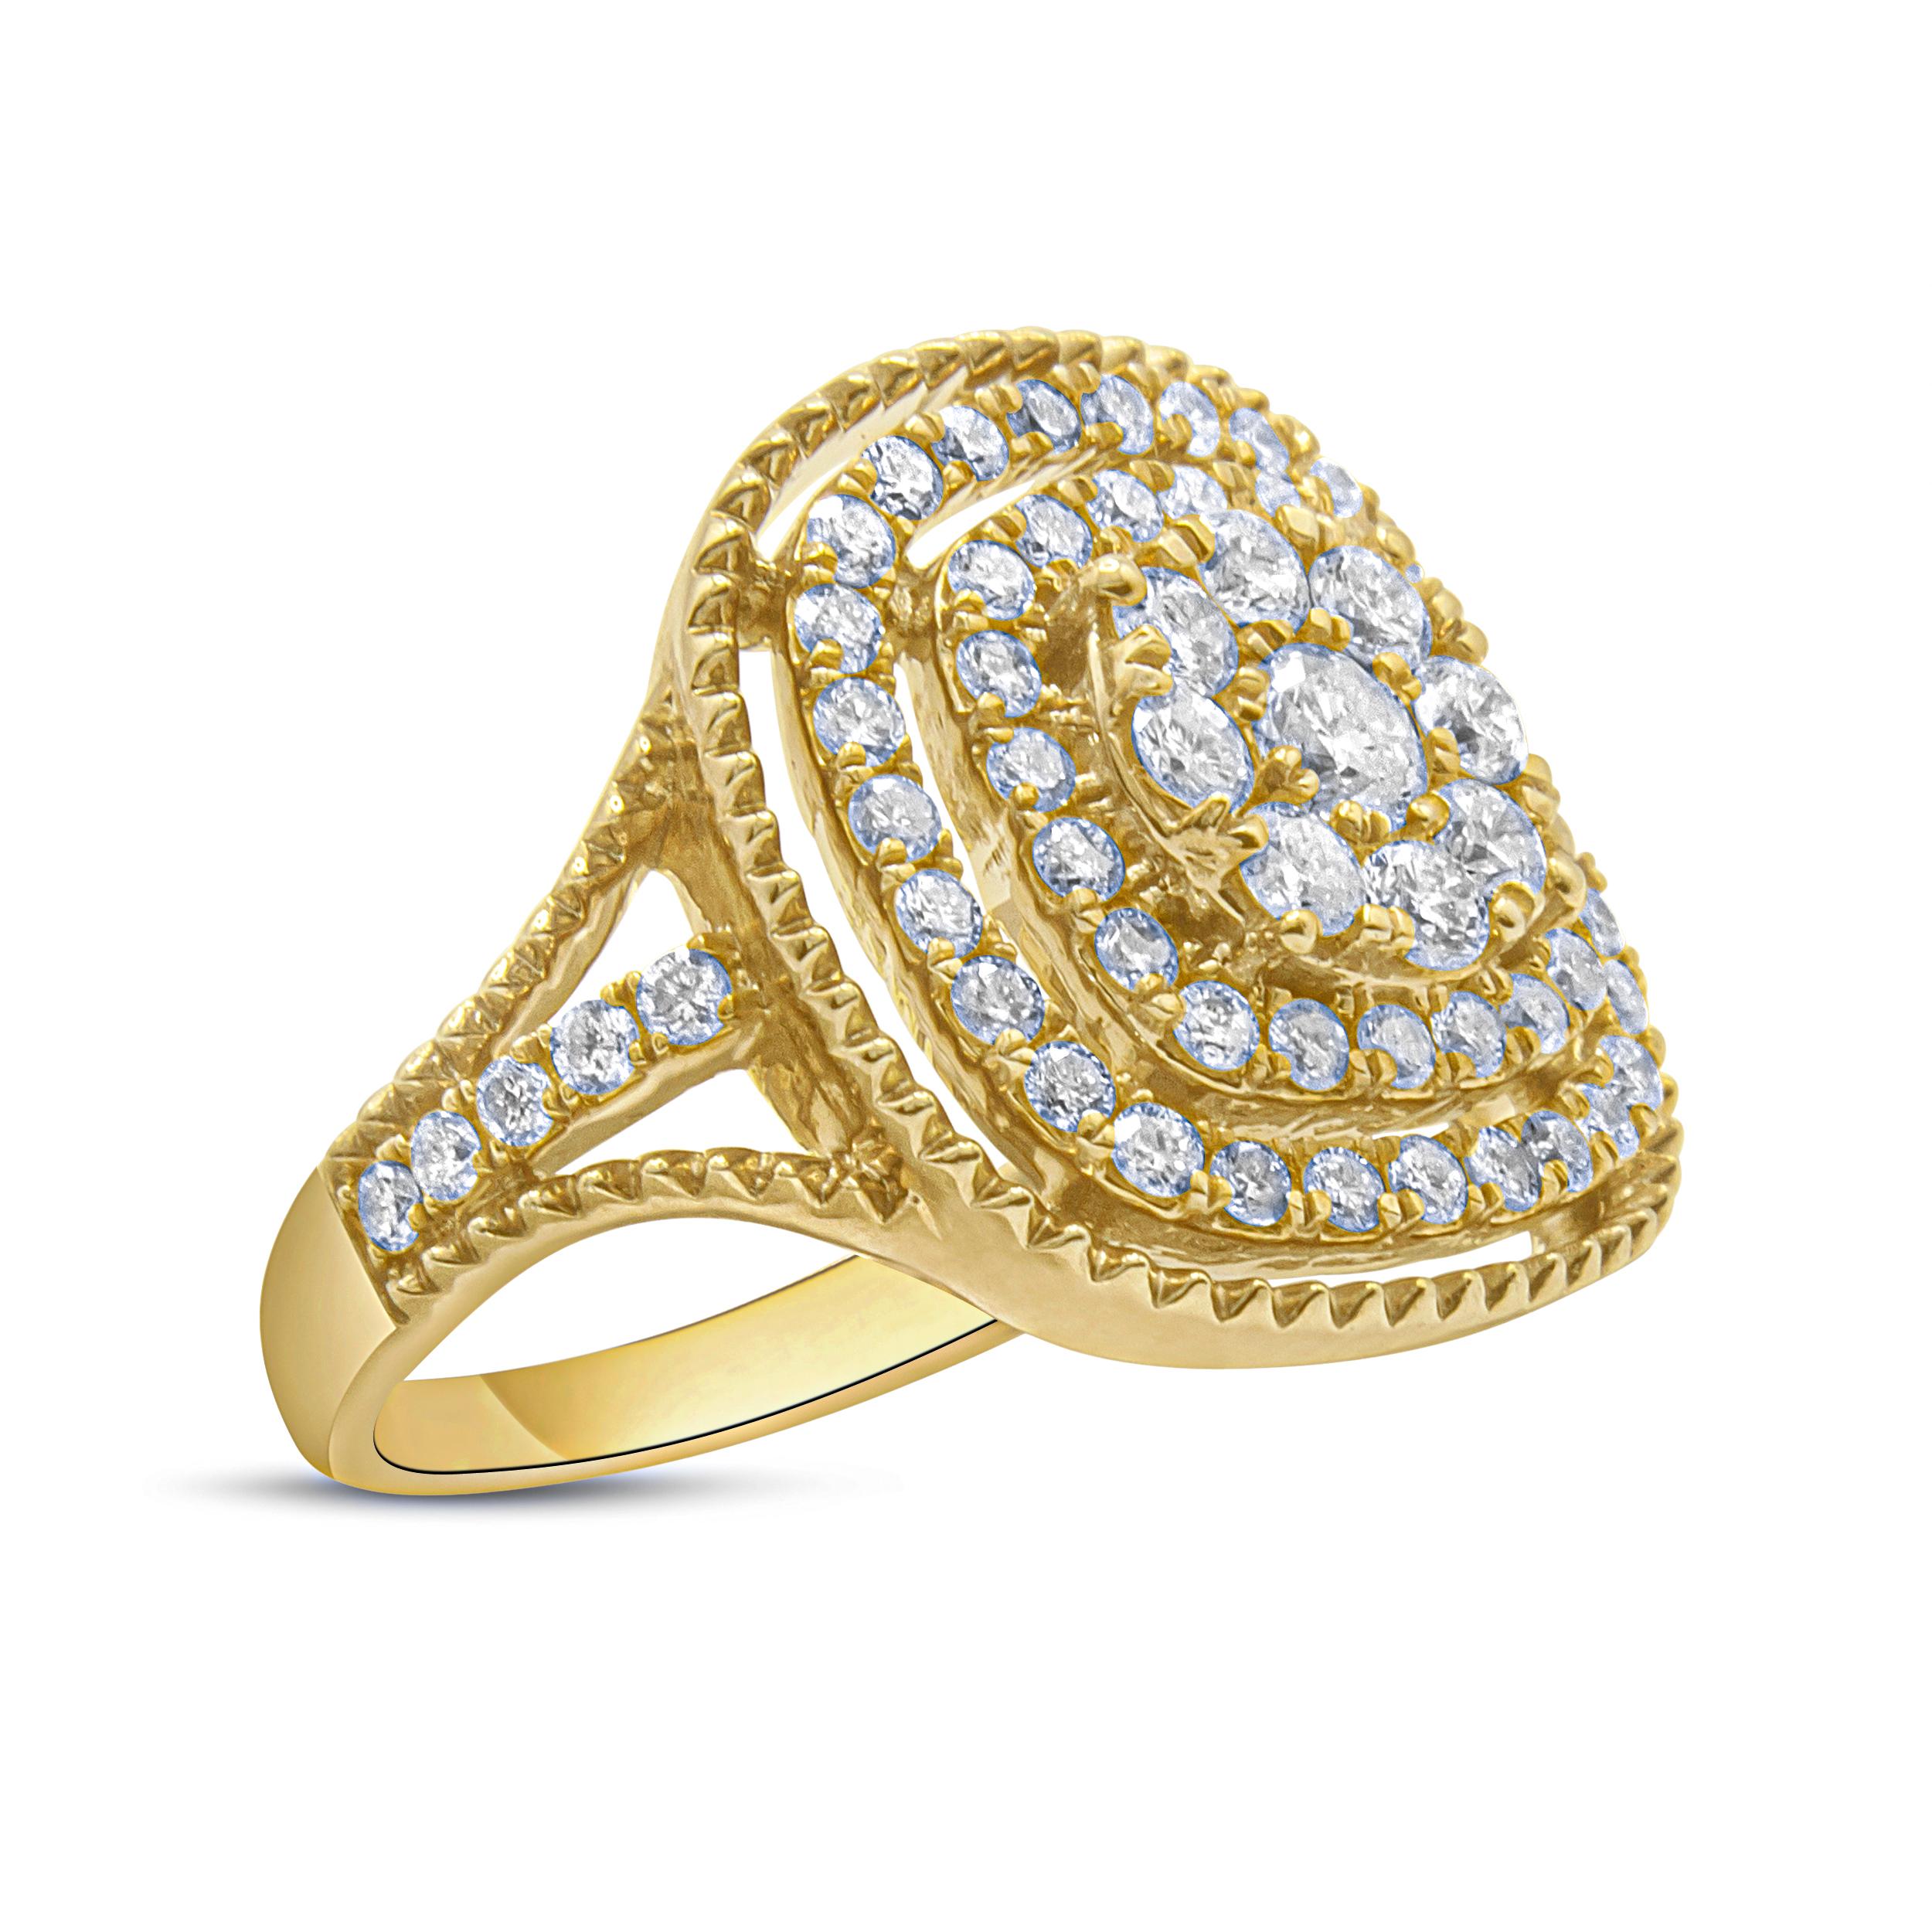 For Sale:  10K Yellow Gold Plated .925 Sterling Silver 1 1/4 Carat Diamond Cocktail Ring 2